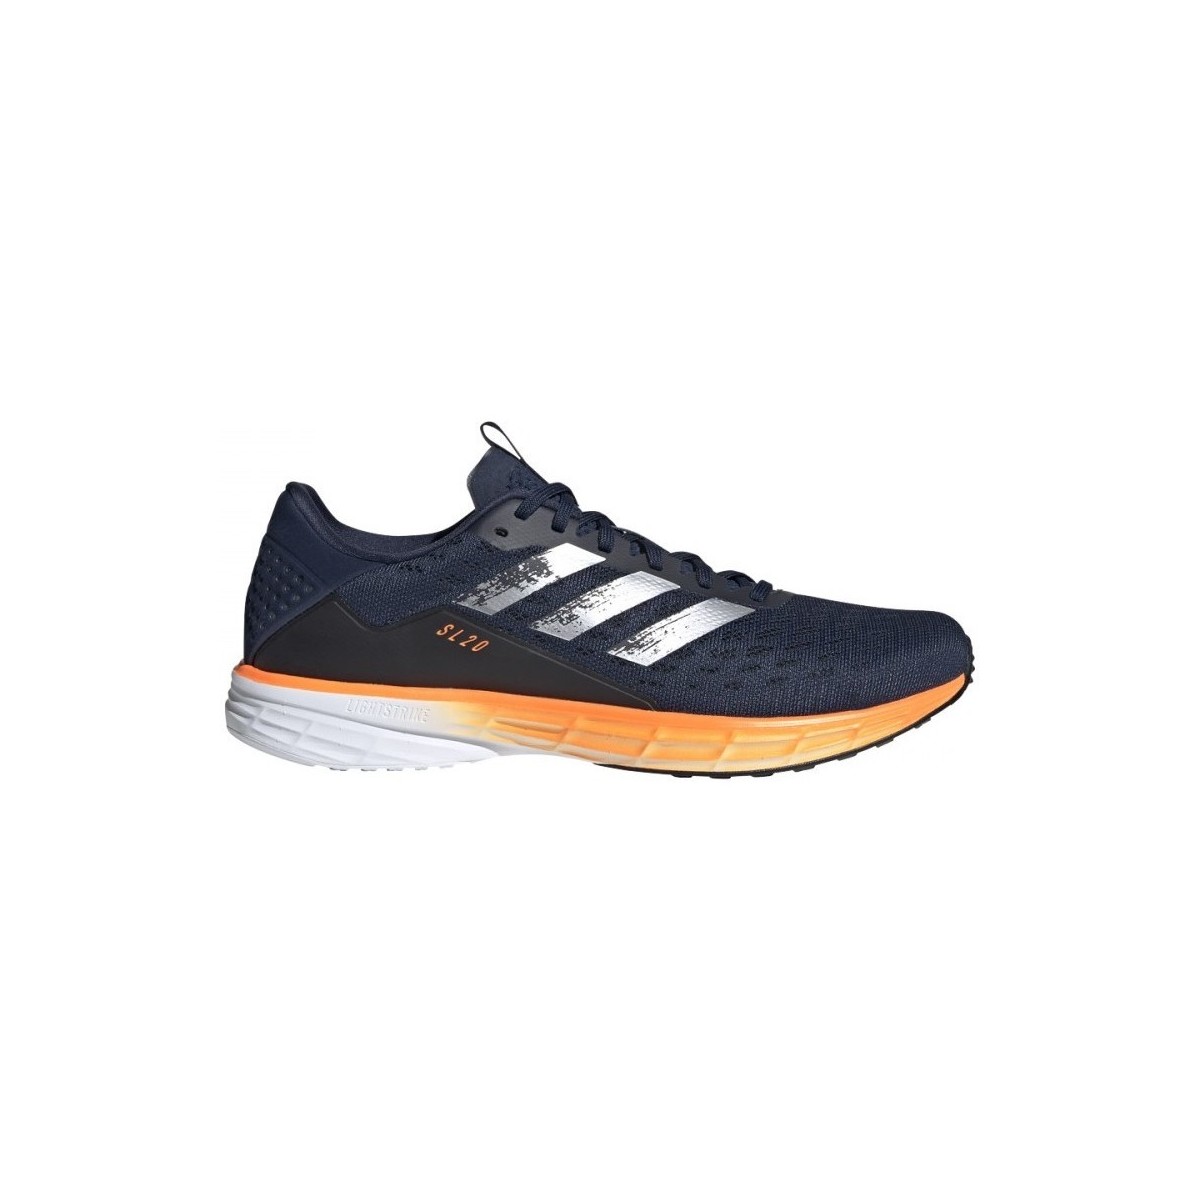 Chaussures Homme adidas anak perusahaan indonesia online Sl20 Rose